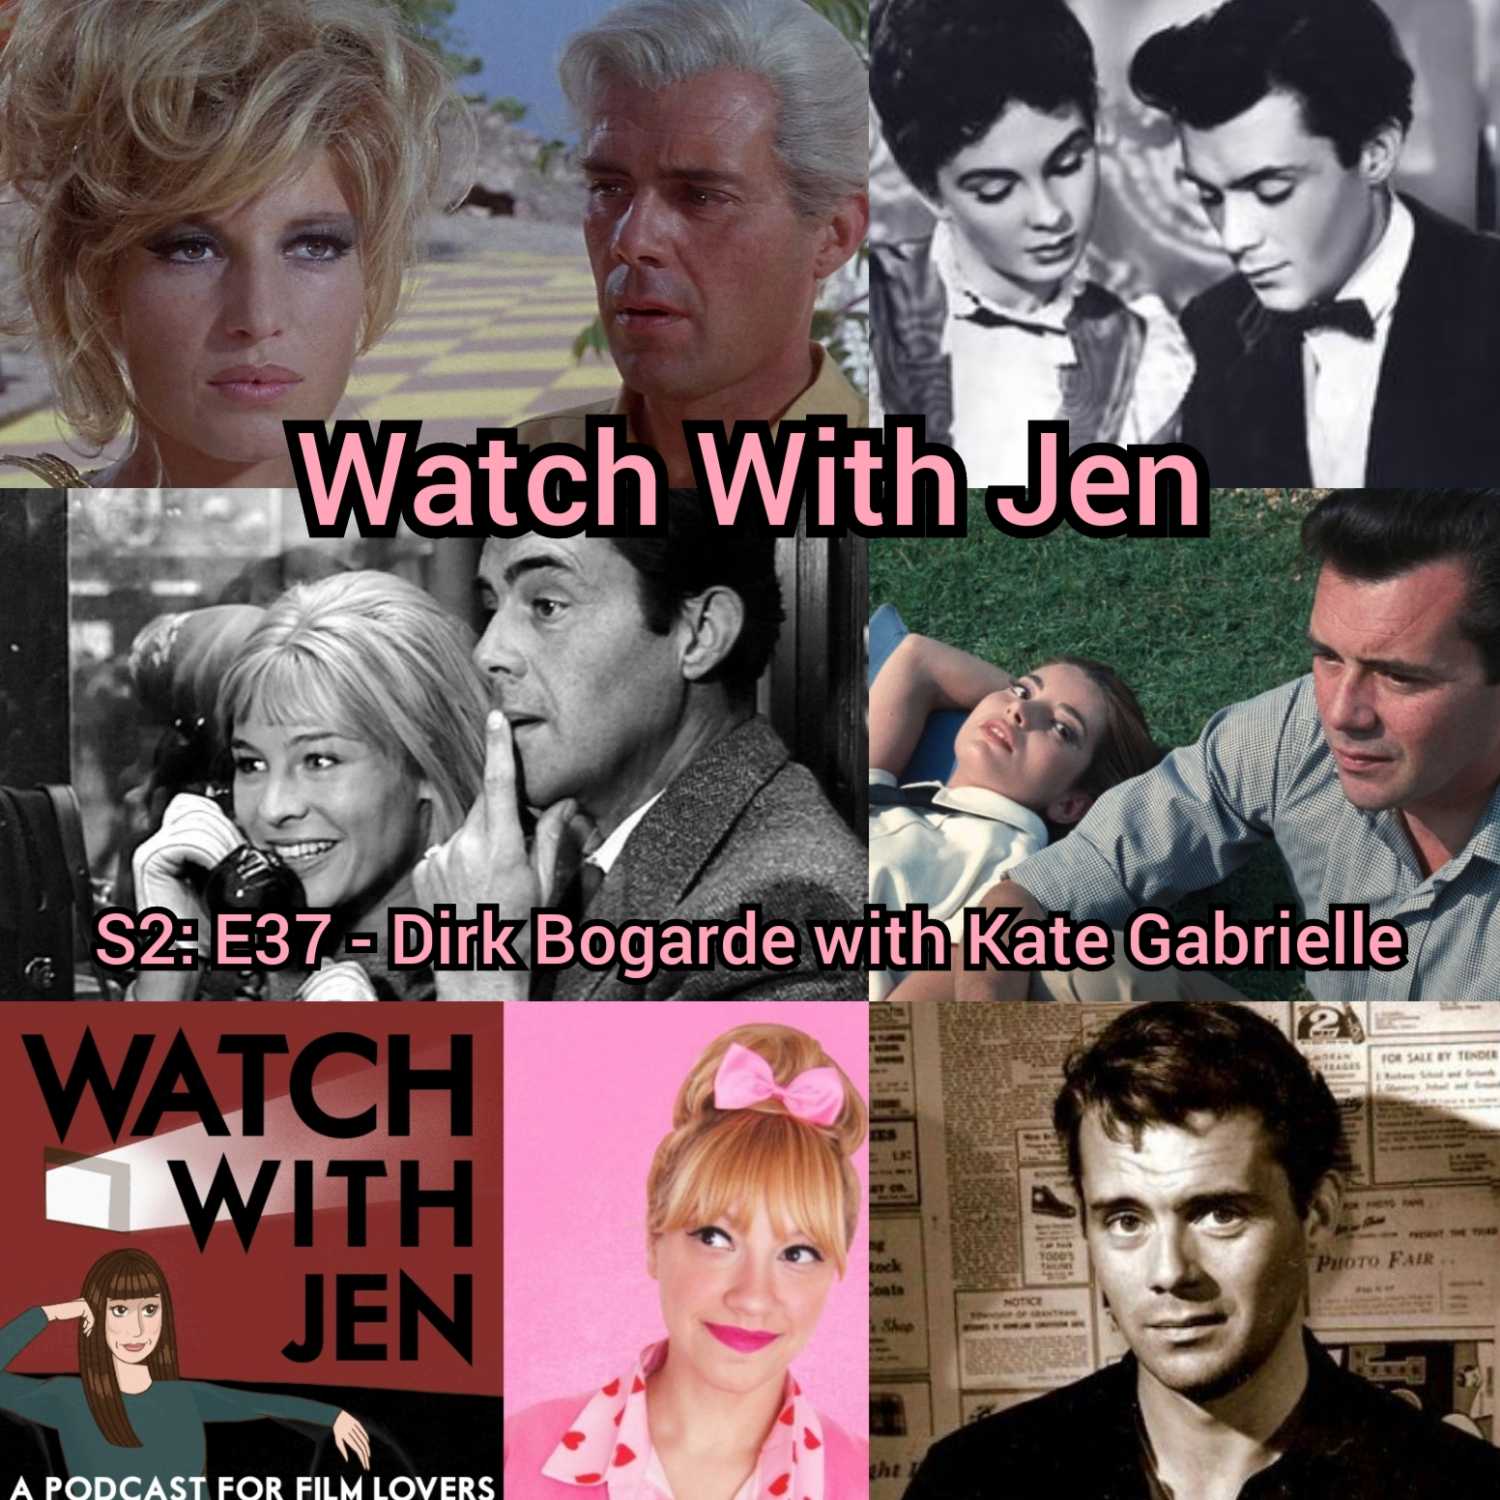 Watch With Jen - S2: E37 - Dirk Bogarde with Kate Gabrielle